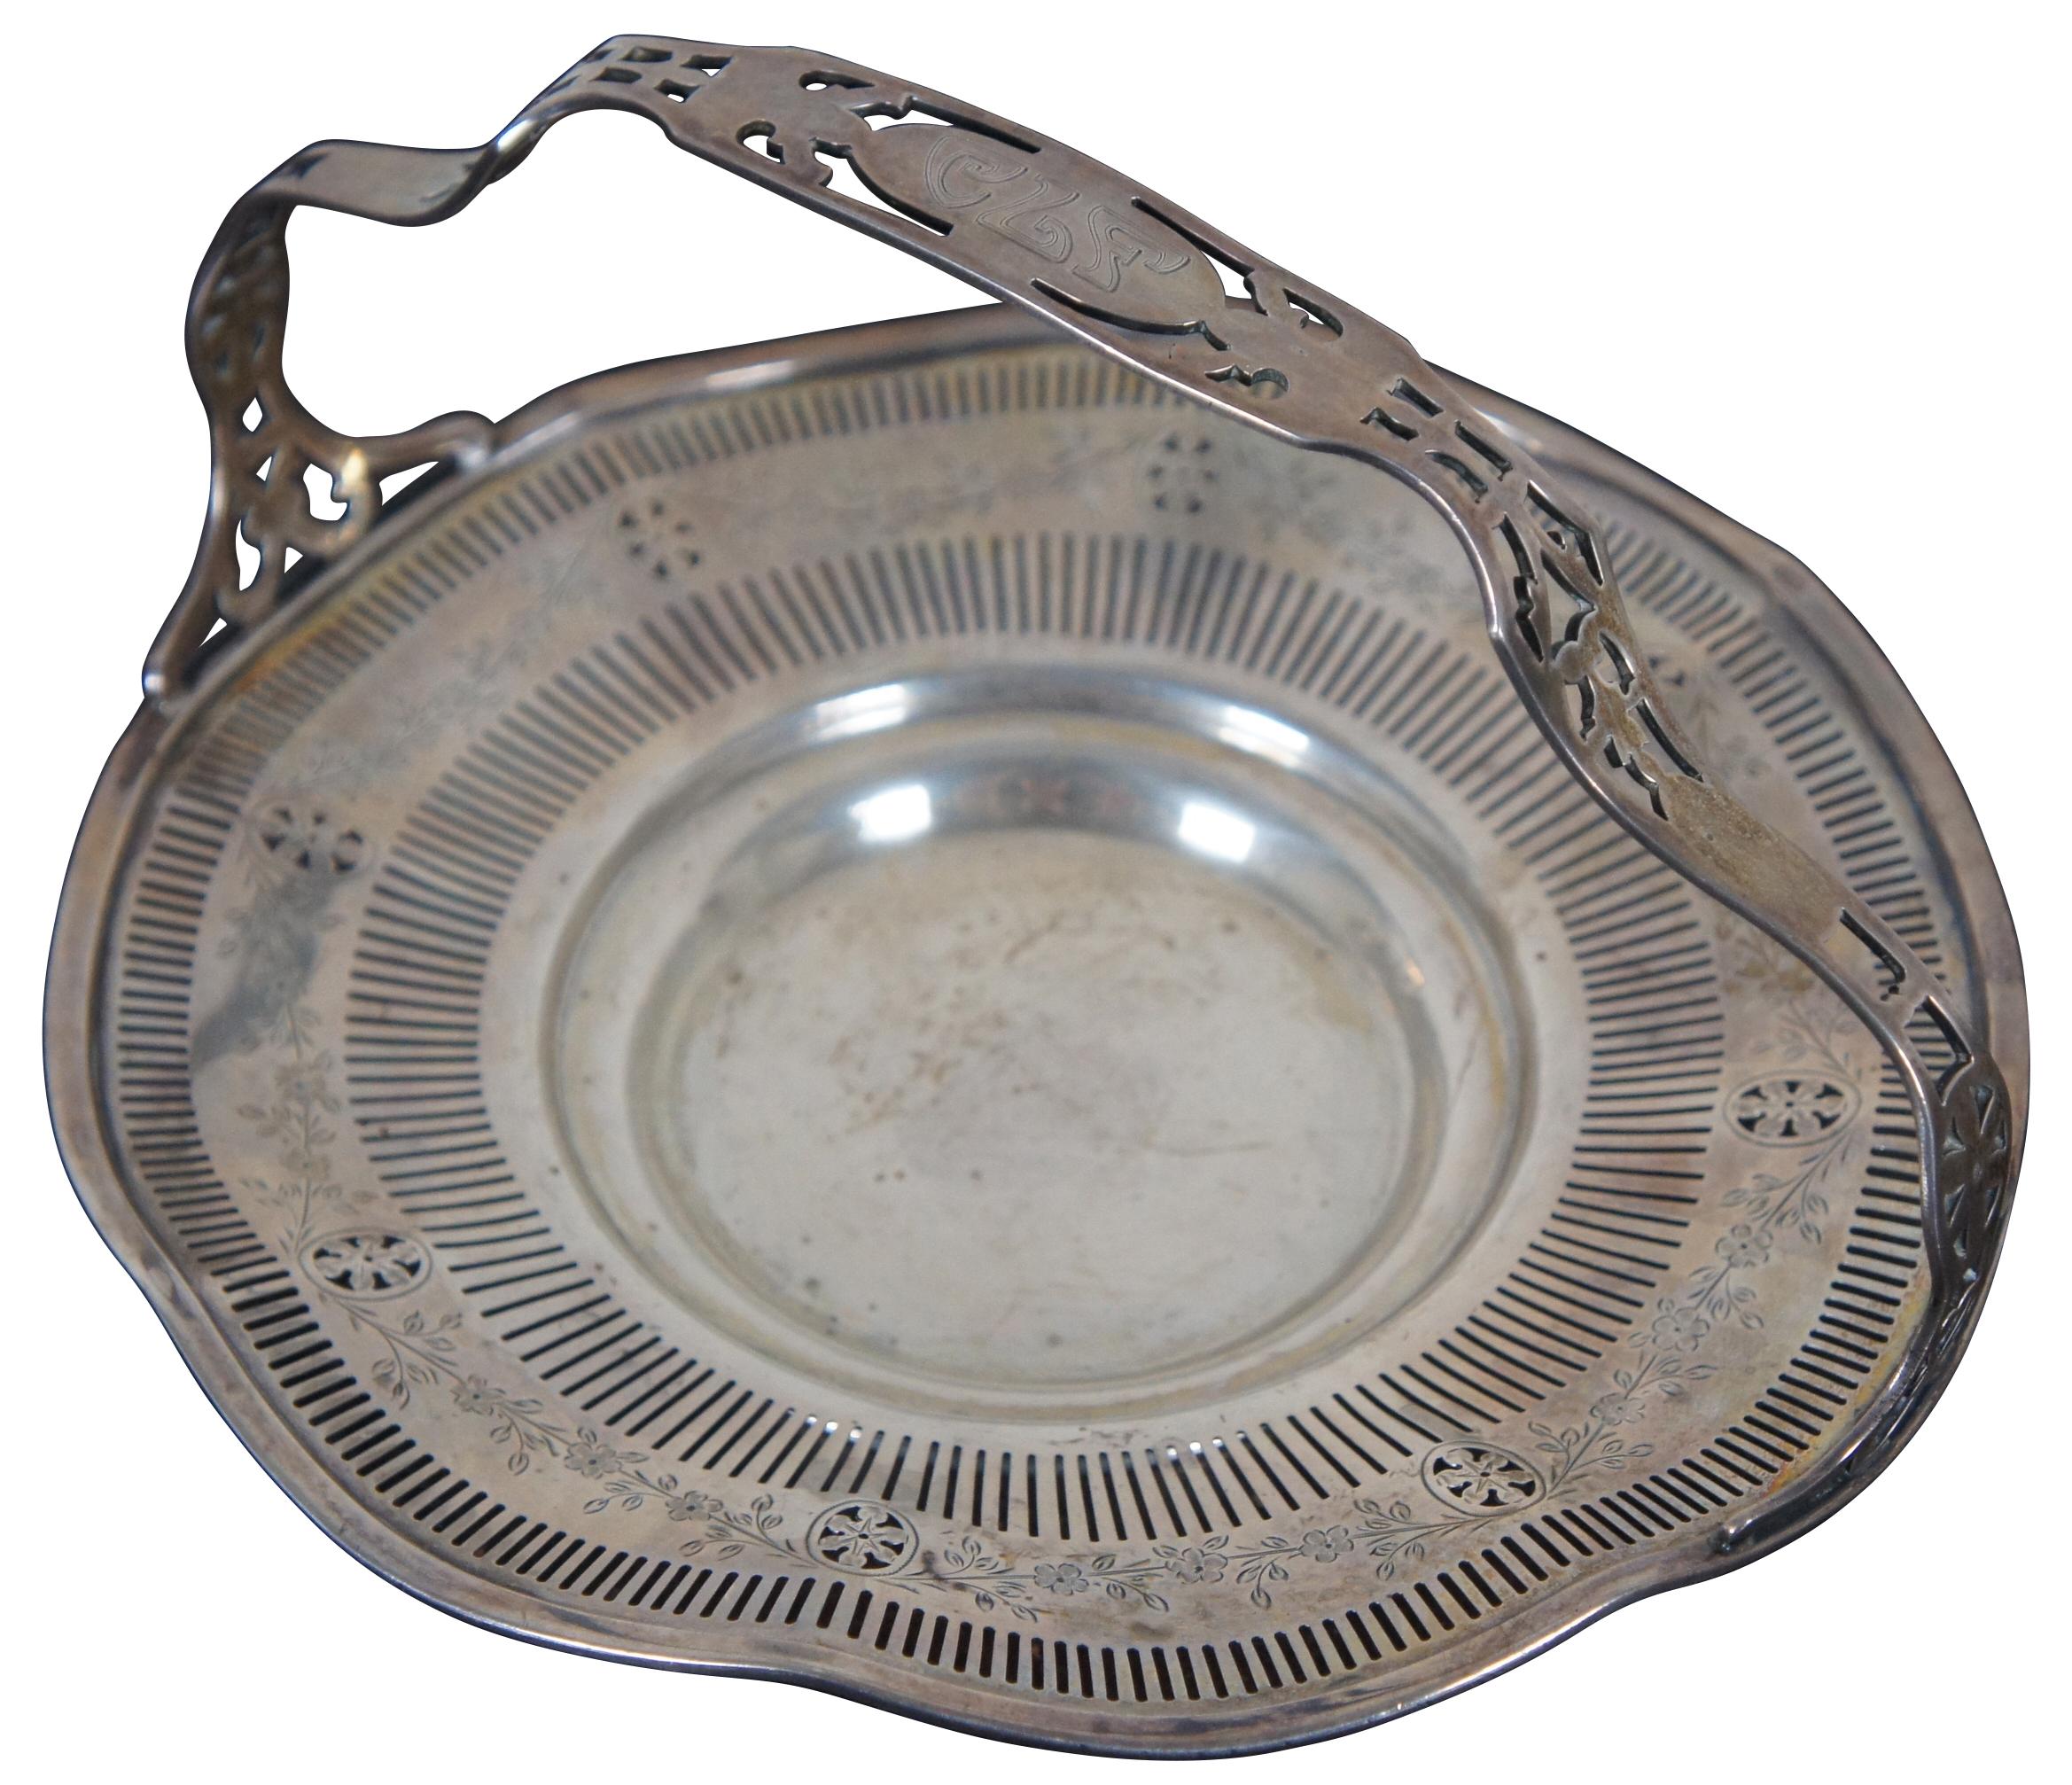 Antique Gorham sterling silver 925 Edwardian style serving basket numbered 2225A with ruffled, reticulated / pierced edge, etched floral designs and monogram CLF on the handle.
 